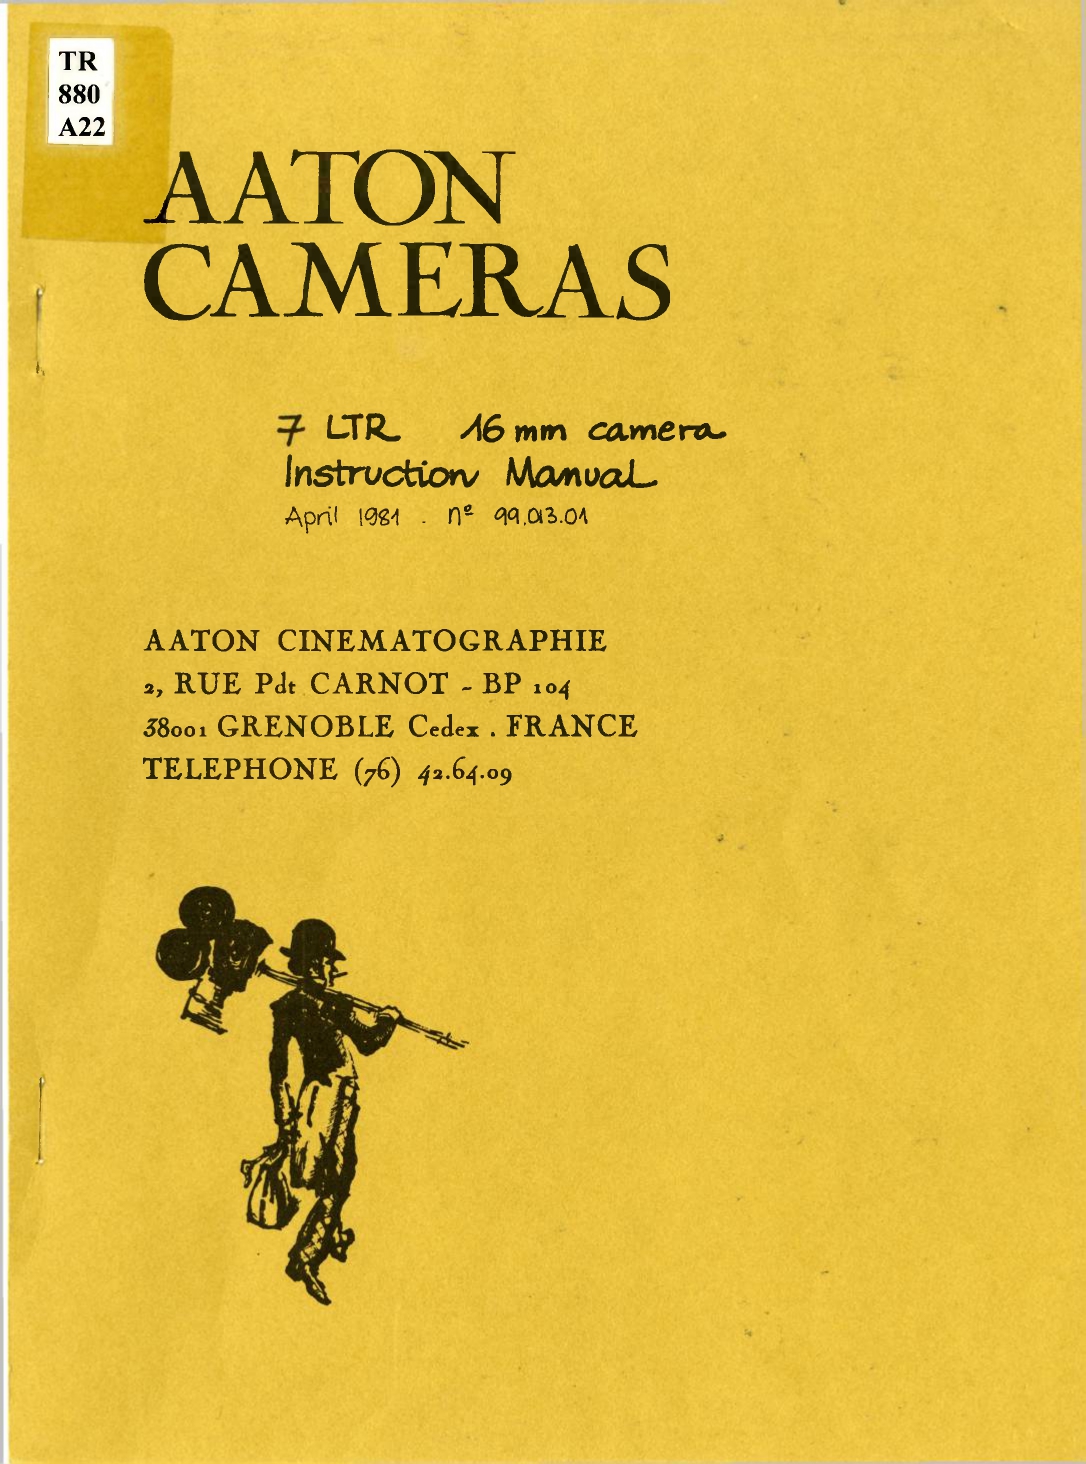 Title page of the Aaton Cameras manual. The address of the head office in France and the table of contents can both be seen. On the left-hand side of the page, there is a drawing of a man wearing a bowler hat. On his right shoulder, he is carrying a Bell & Howell attached to a tripod. In his left, he is carrying a satchel.